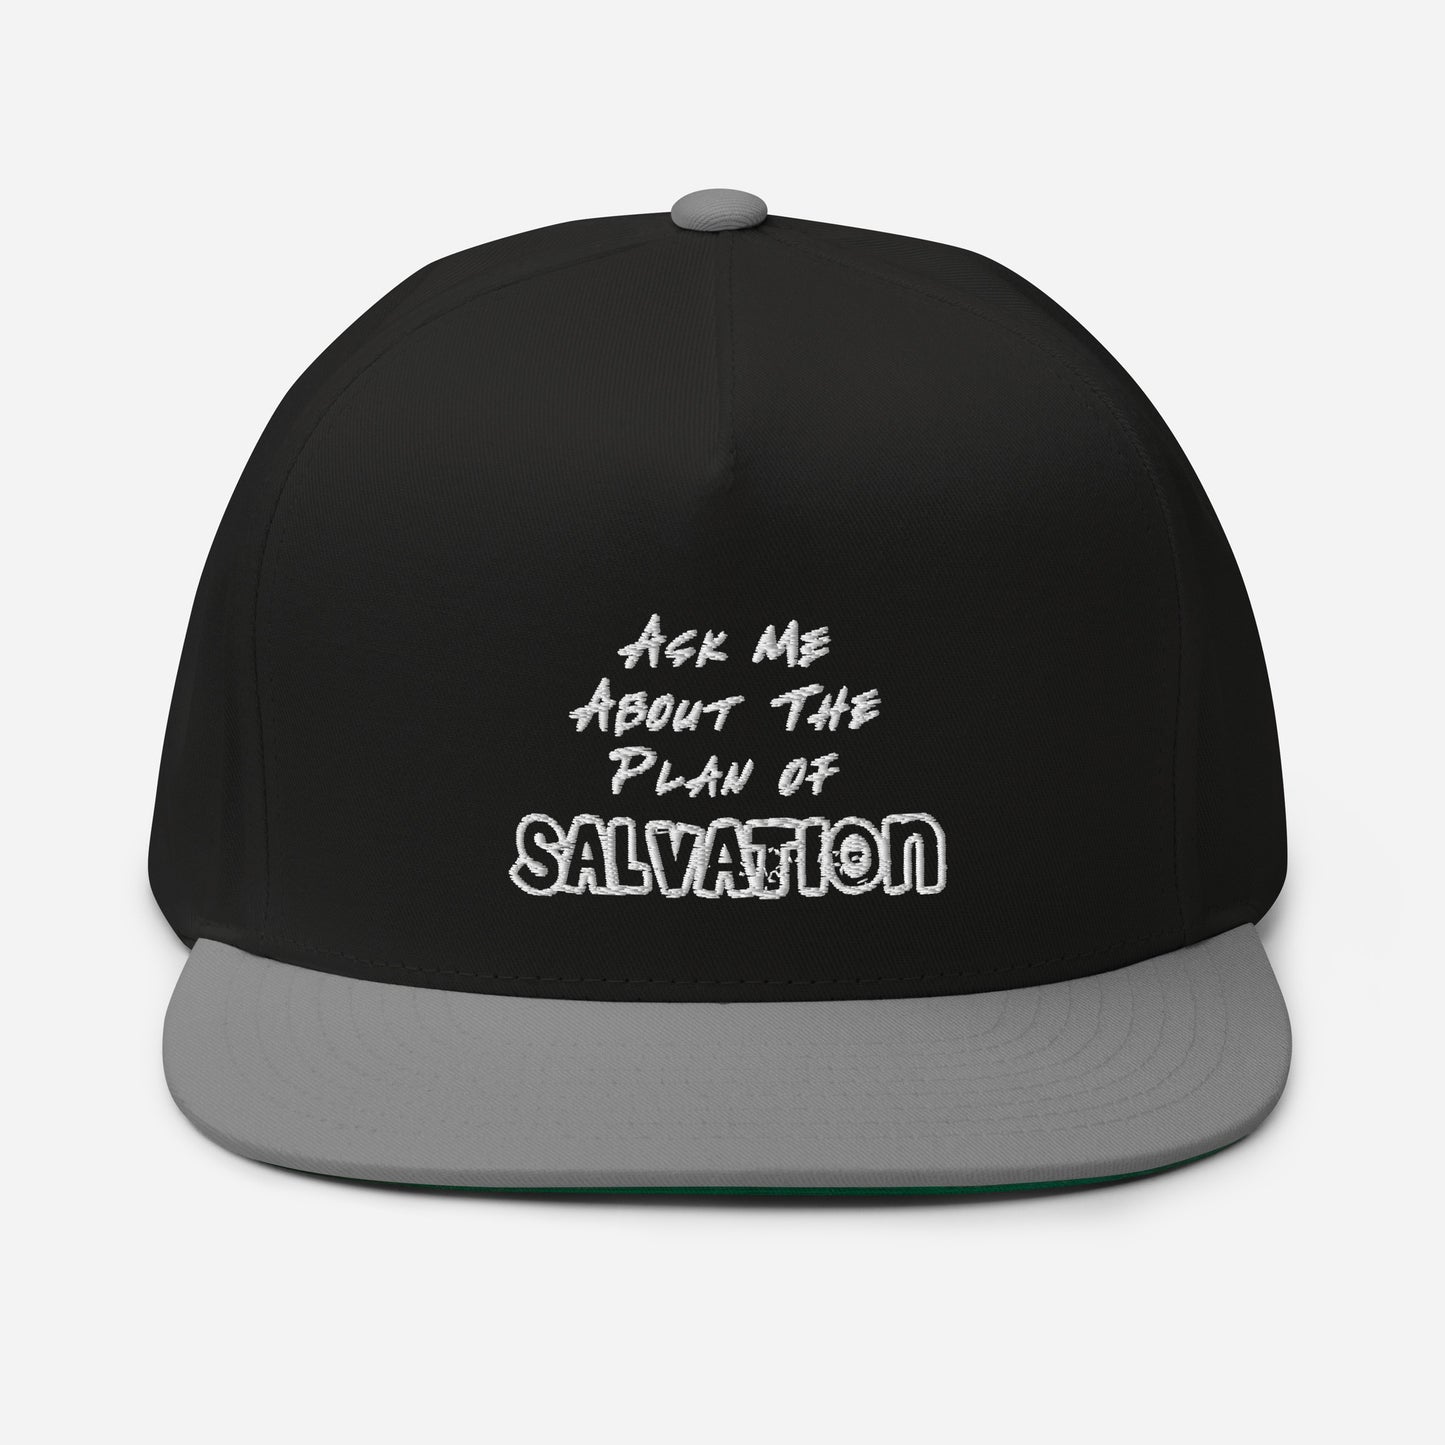 Ask Me About The Plan of Salvation Flat Bill Cap